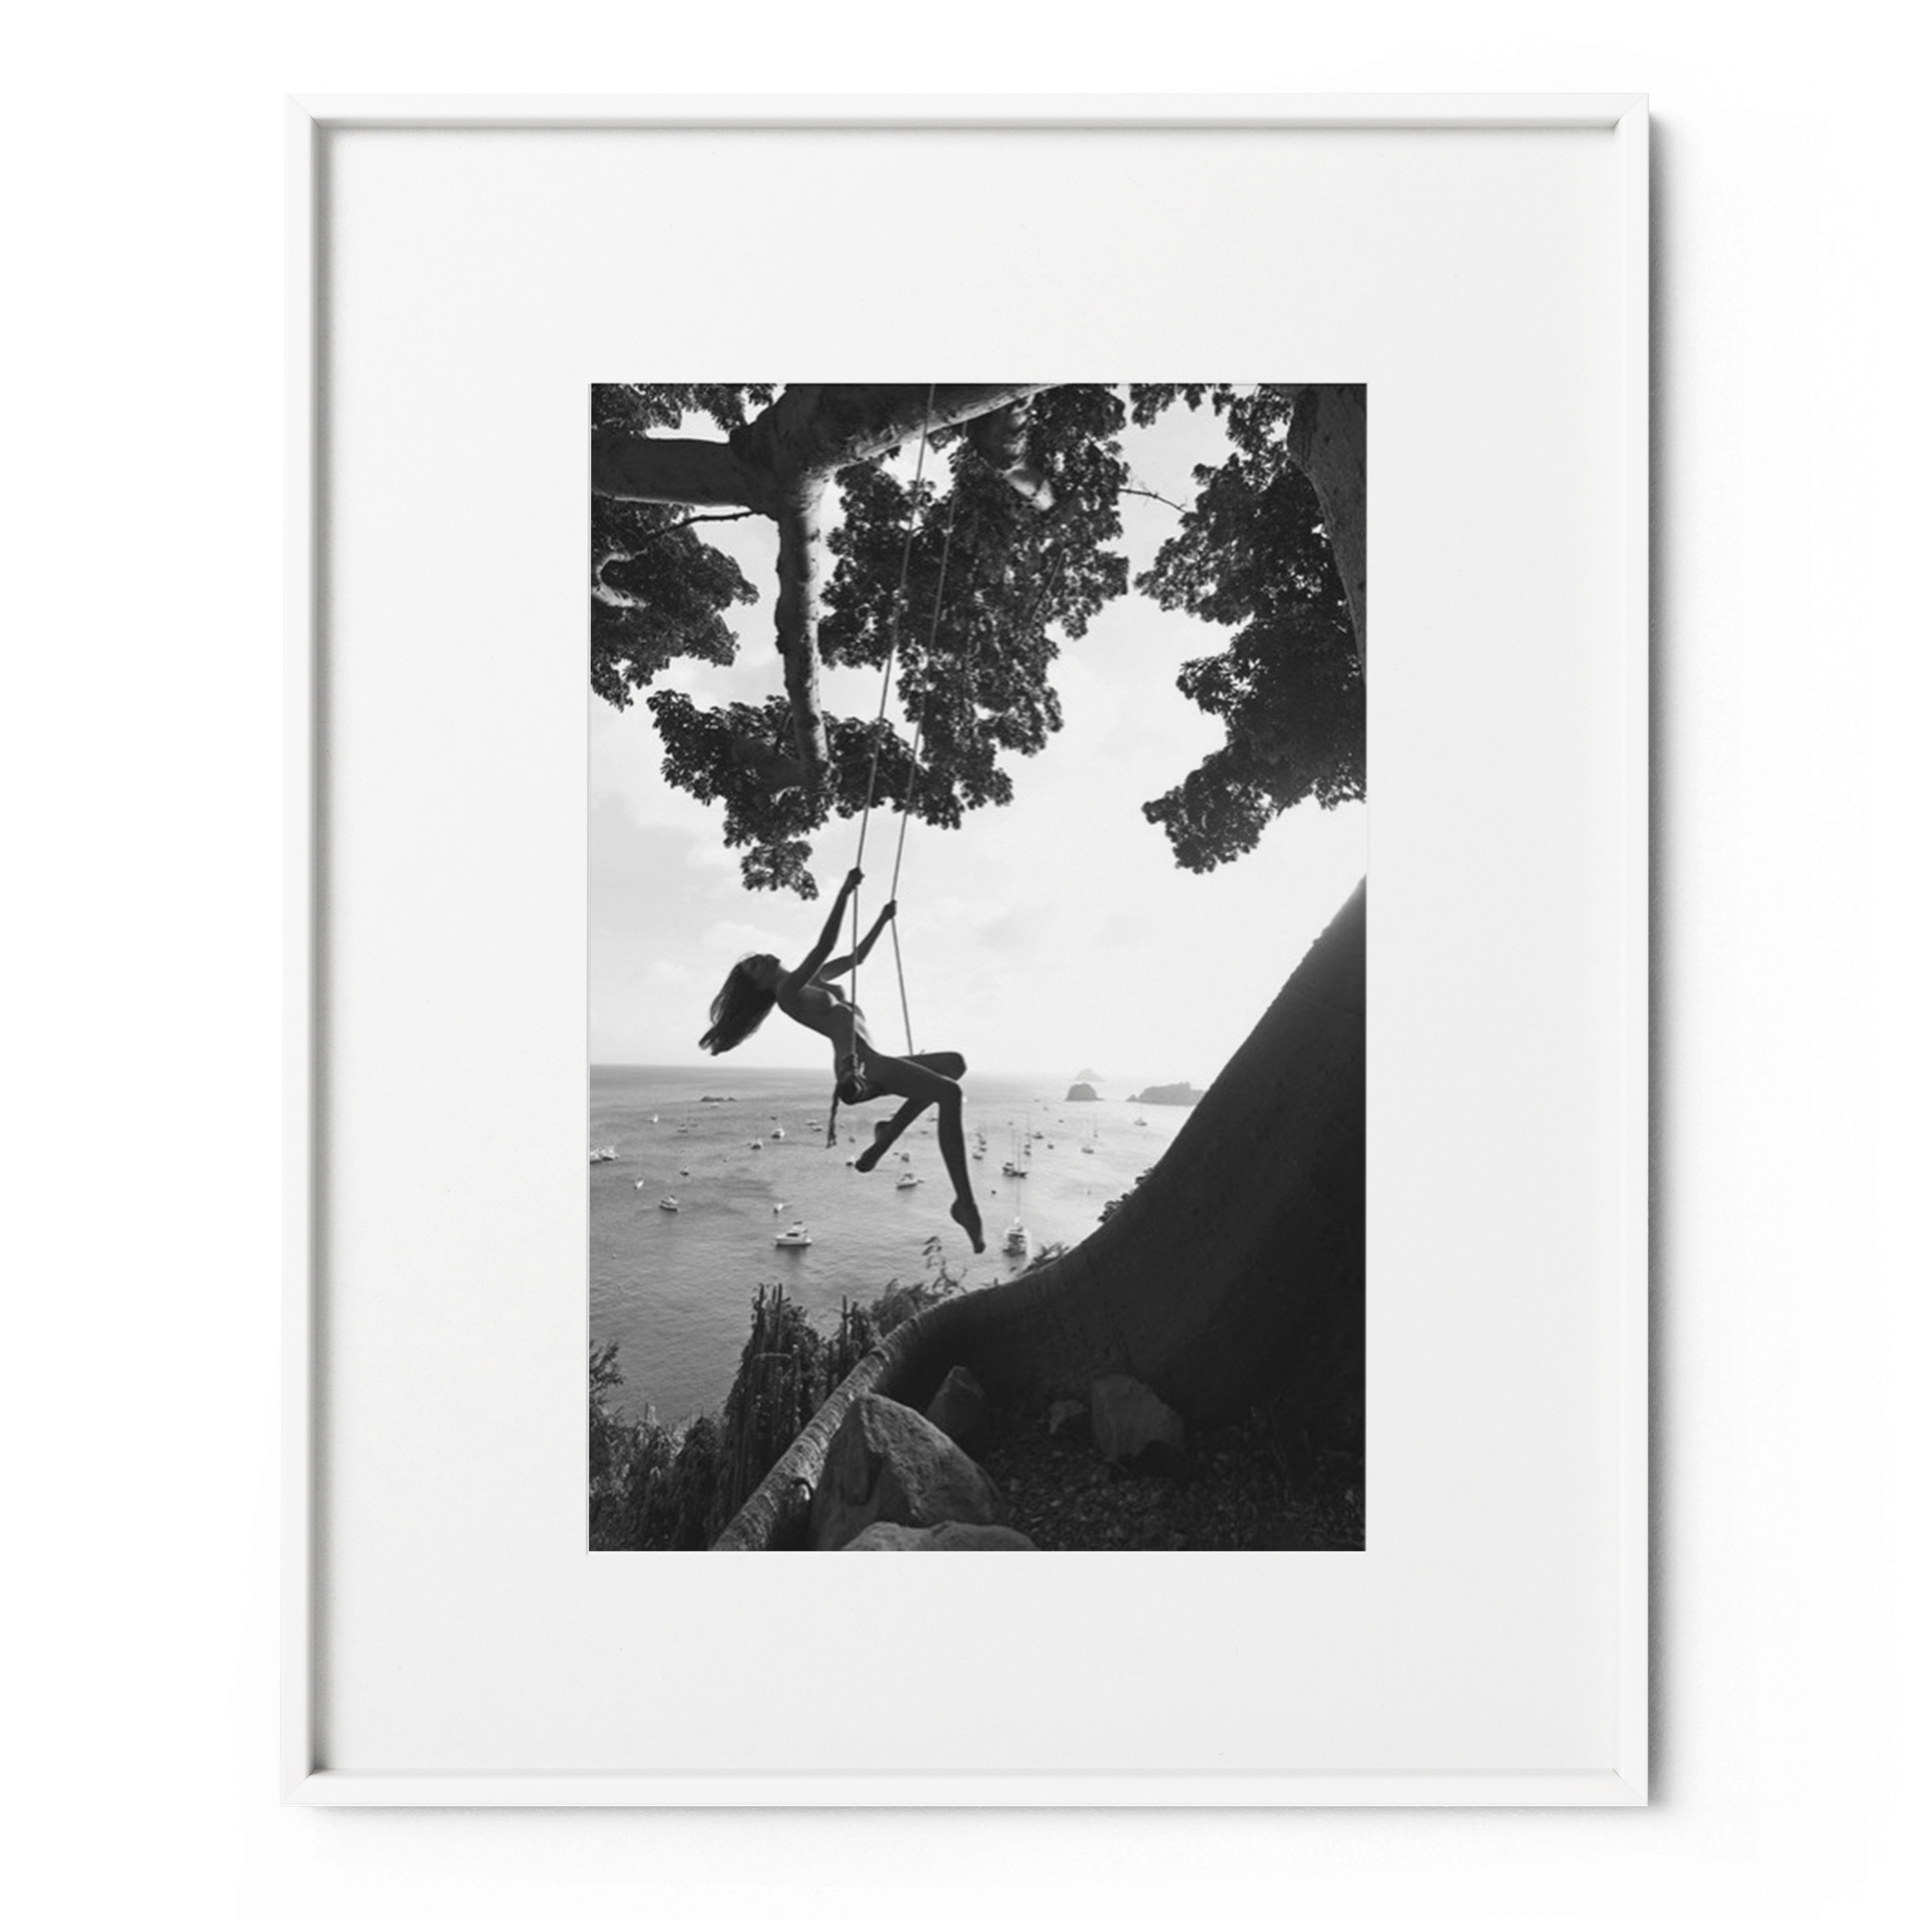 Swinging Alexis (St Barth) by Jean-Philippe Piter